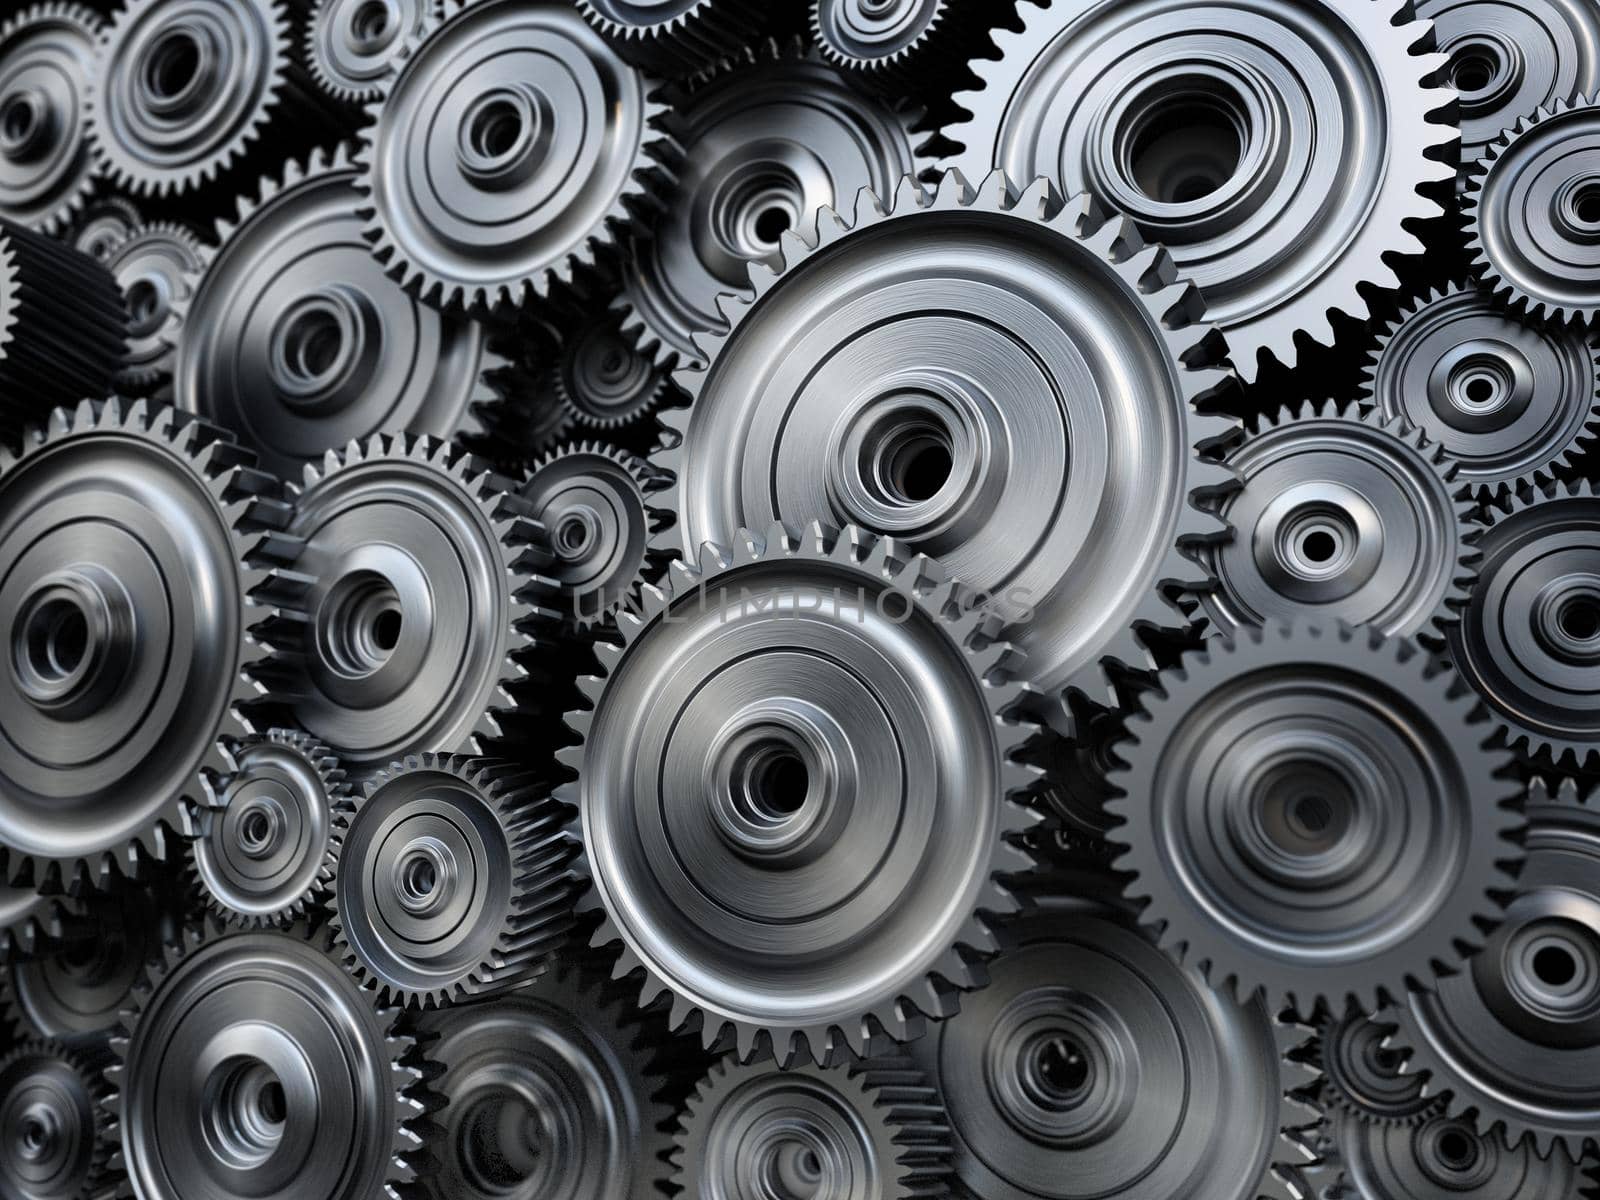 Background formed with group of 3D steel wheels in motion. 3D illustration.